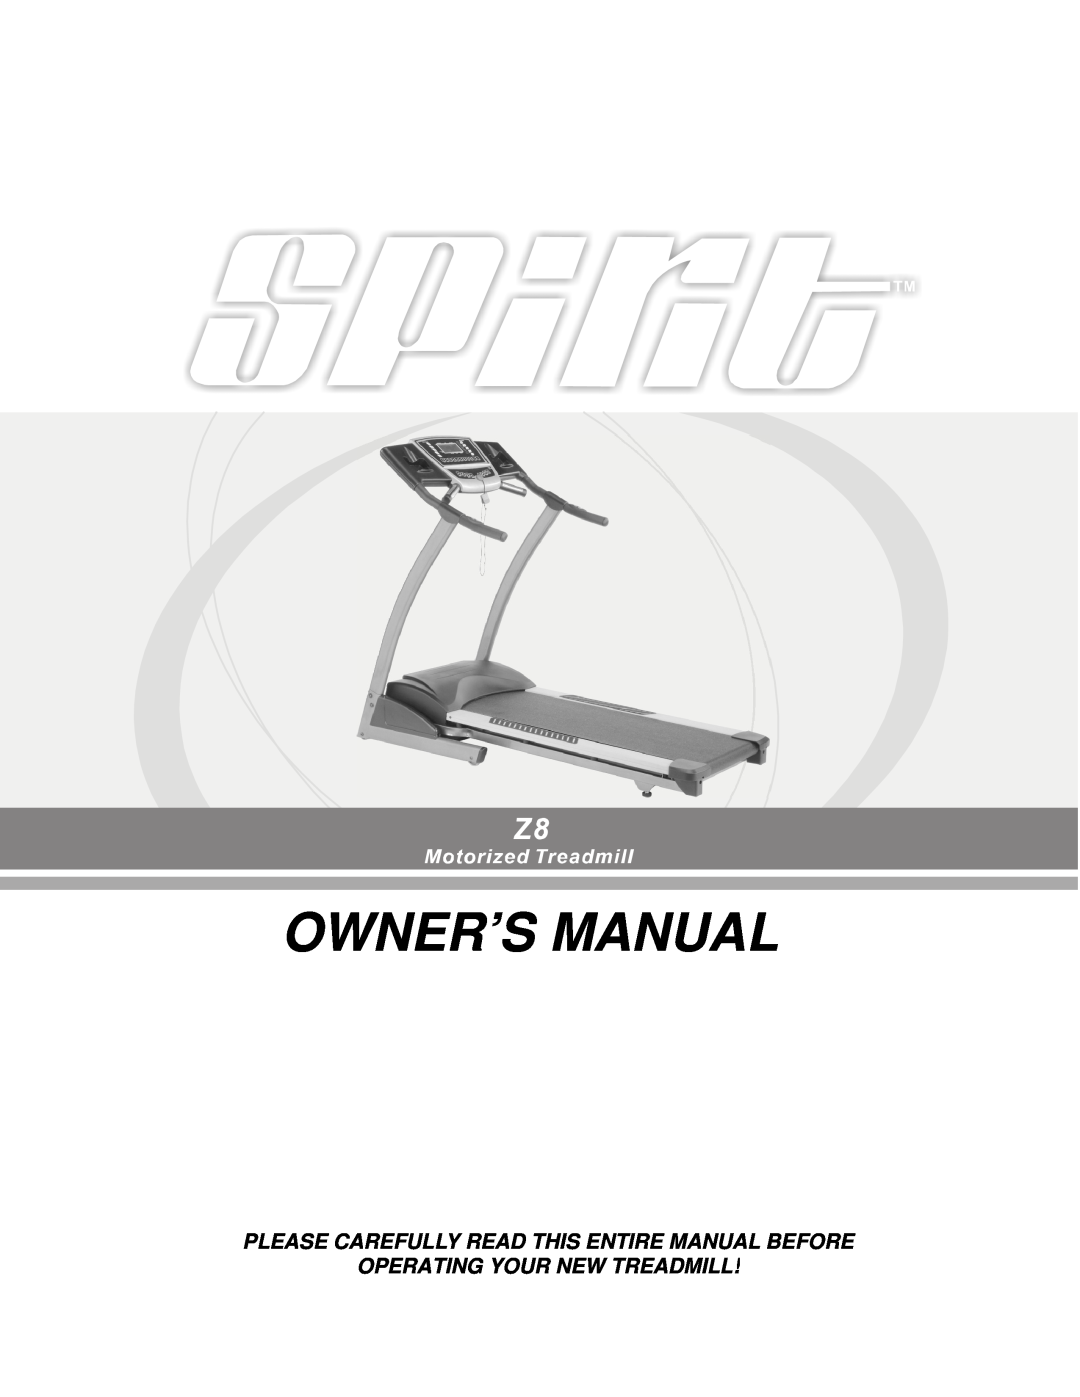 Spirit Z500 owner manual Owner’S Manual, Please Carefully Read This Entire Manual Before, Operating Your New Treadmill 